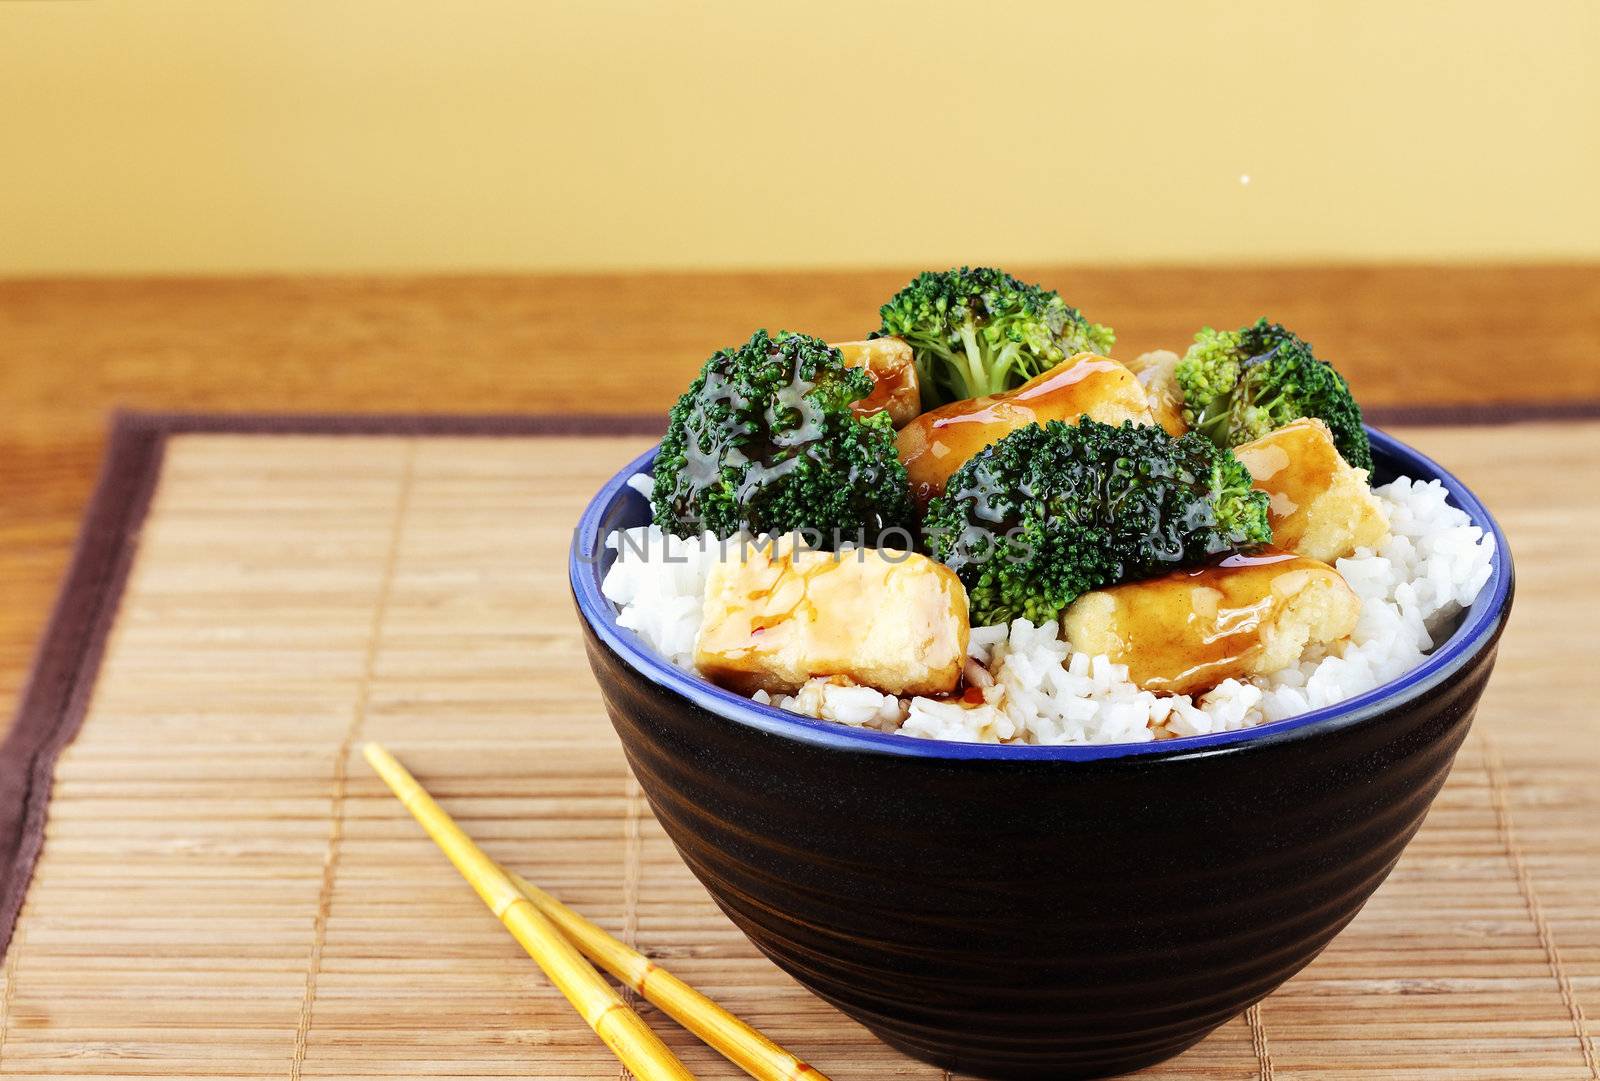 Vegetarian dish of stir fried tofu, broccoli and orange sauce with chopsticks. Selective focus on food with some blur on lower portion of image.

